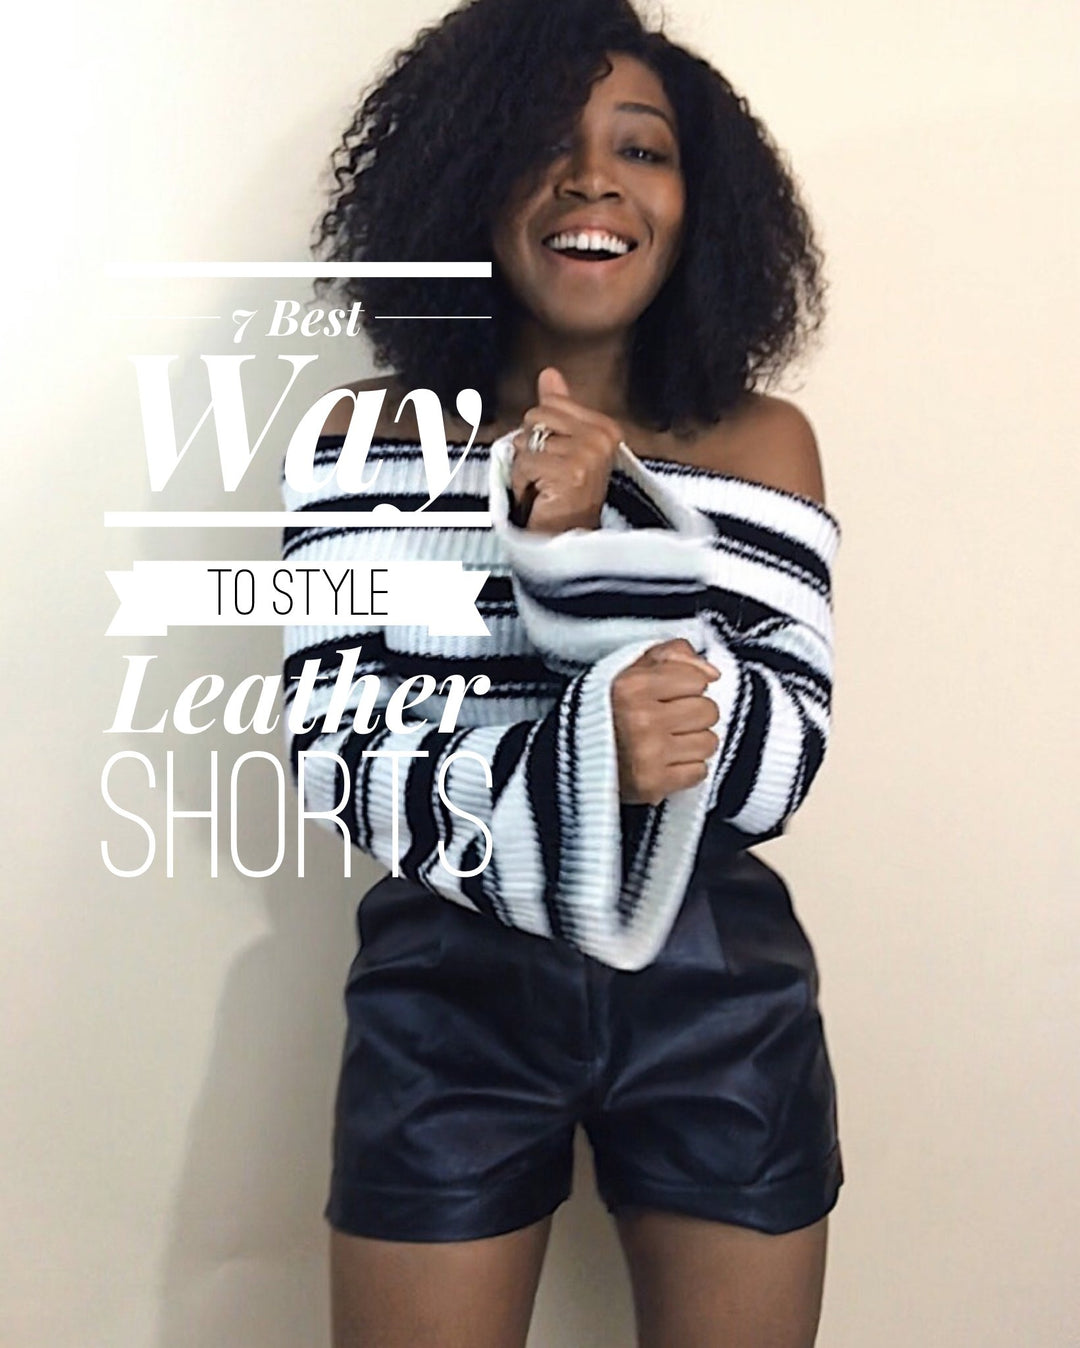 7 Easy Way to Wear Leather Shorts | Tiana Bay